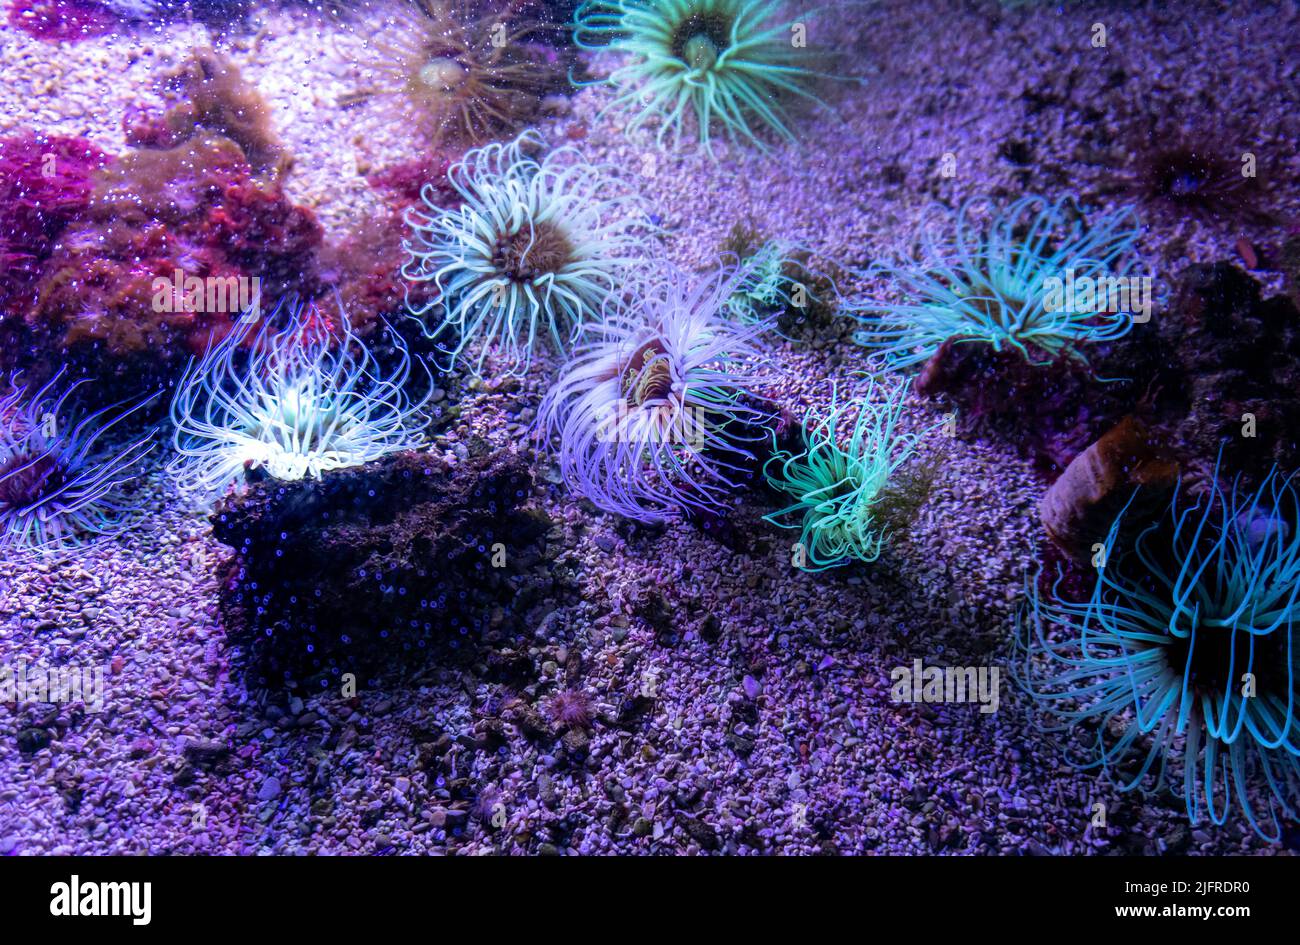 The wonderful colorful species of corals and fluorescent plants that shine in the sunlight on the sand of the ocean deep. Stock Photo